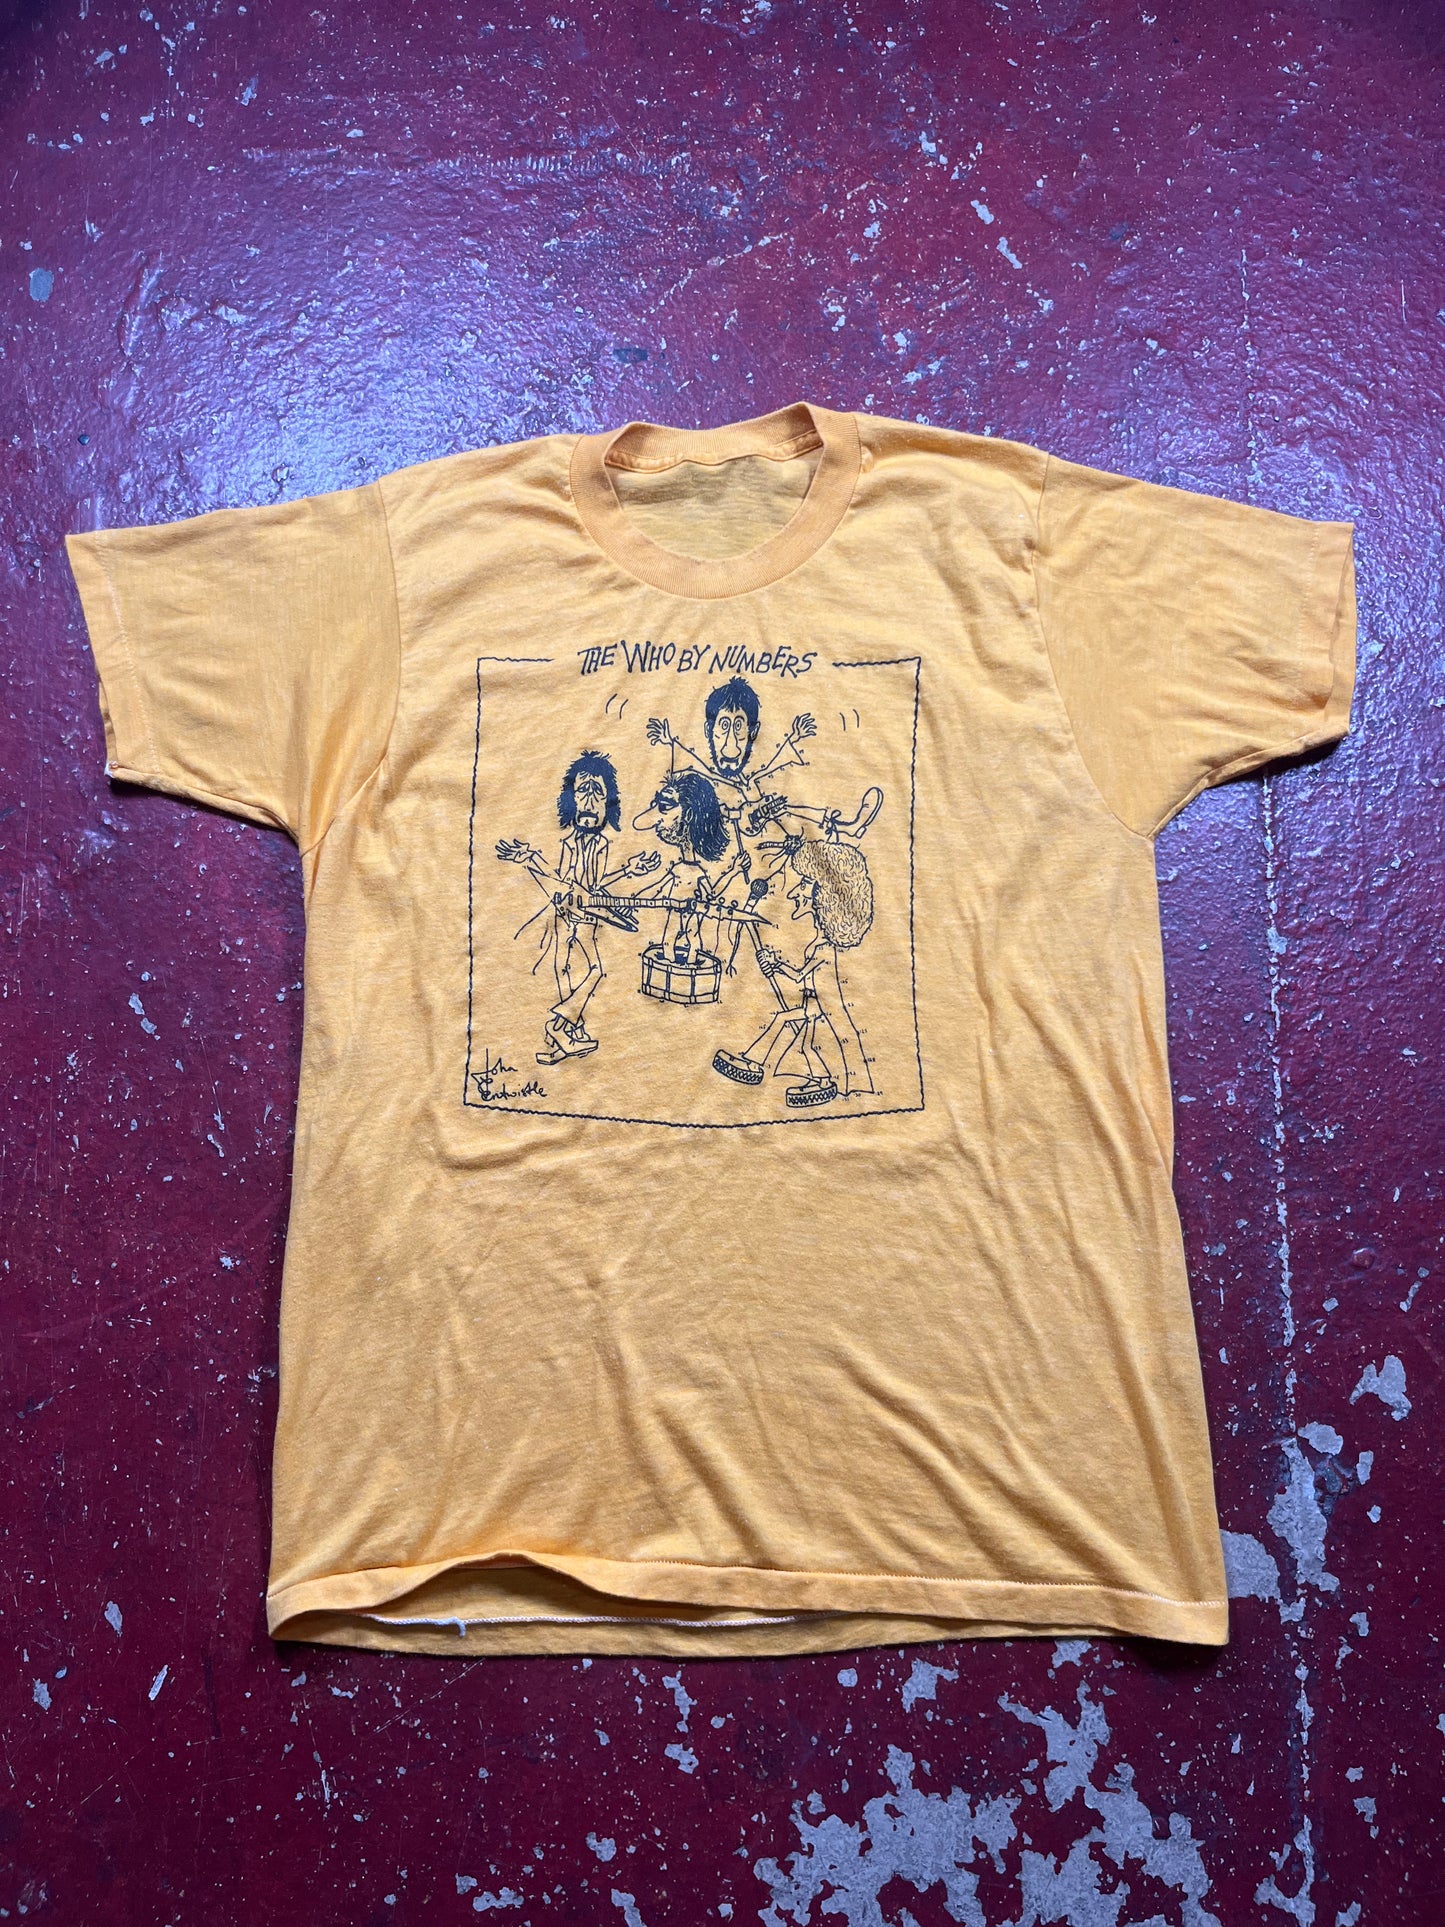 1975 The Who By Numbers Tee